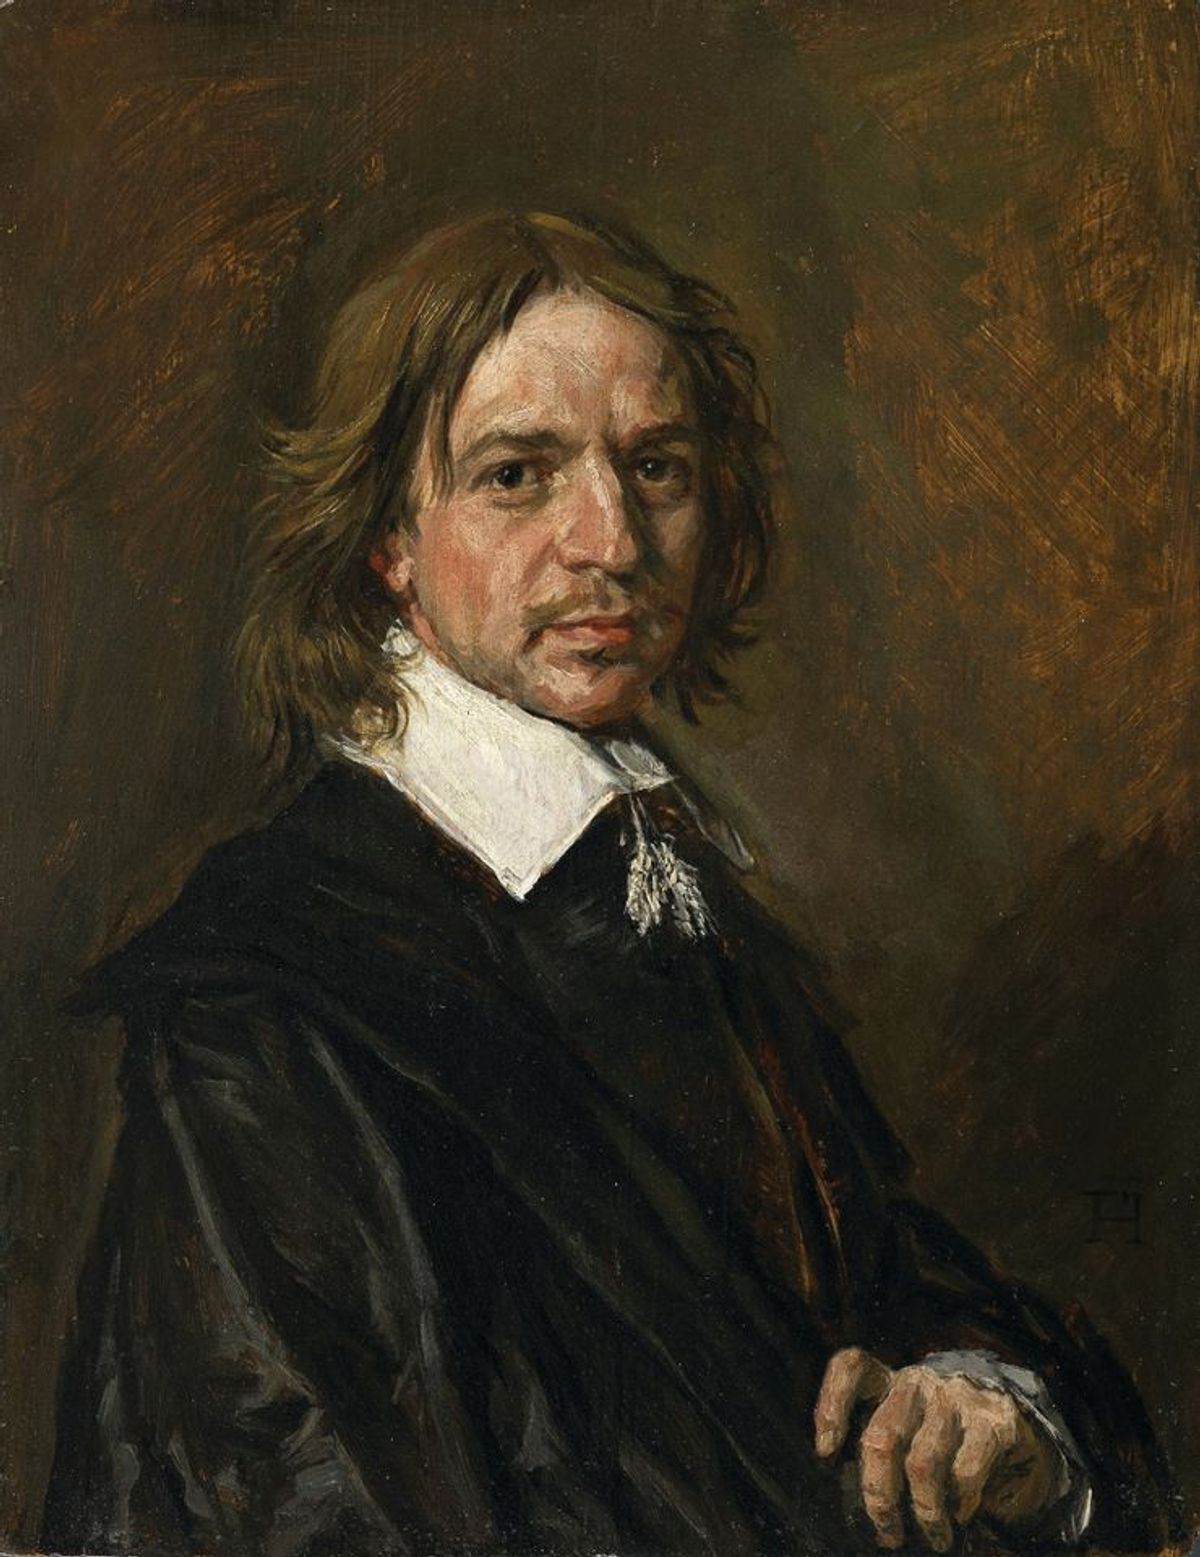 A painting purportedly by Frans Hals was sold by Sotheby's in 2011 